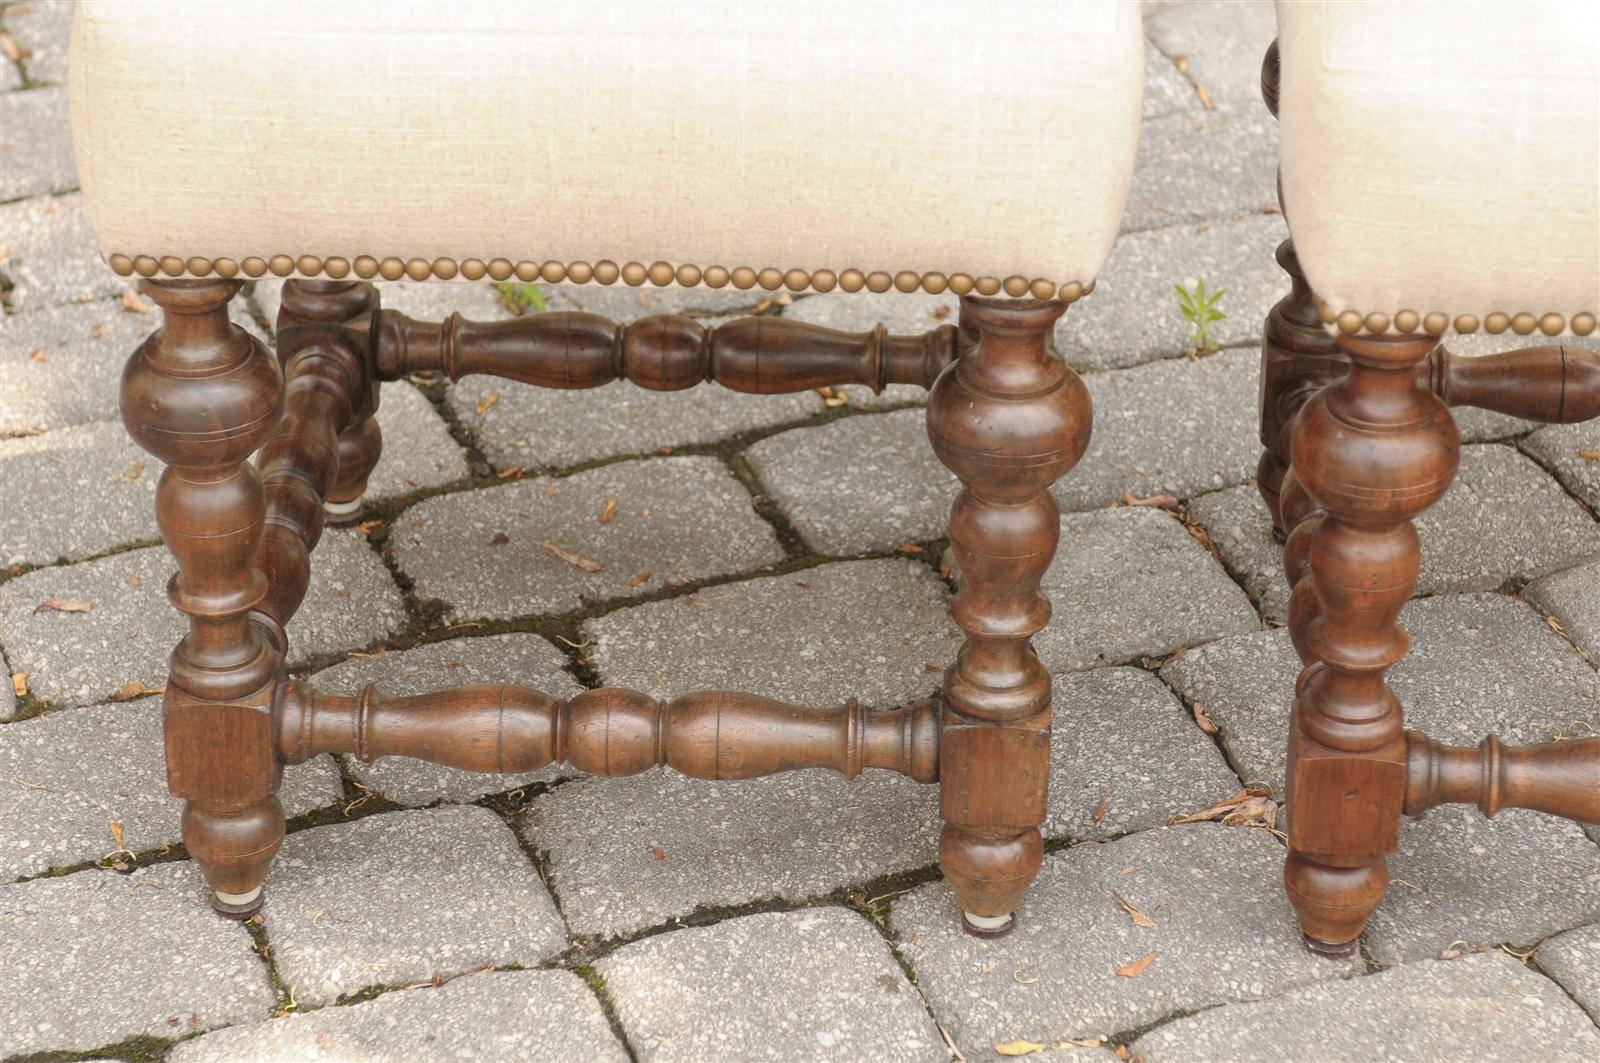 Upholstery Pair of English 1870s Walnut Upholstered Stools with Turned Legs and Stretchers